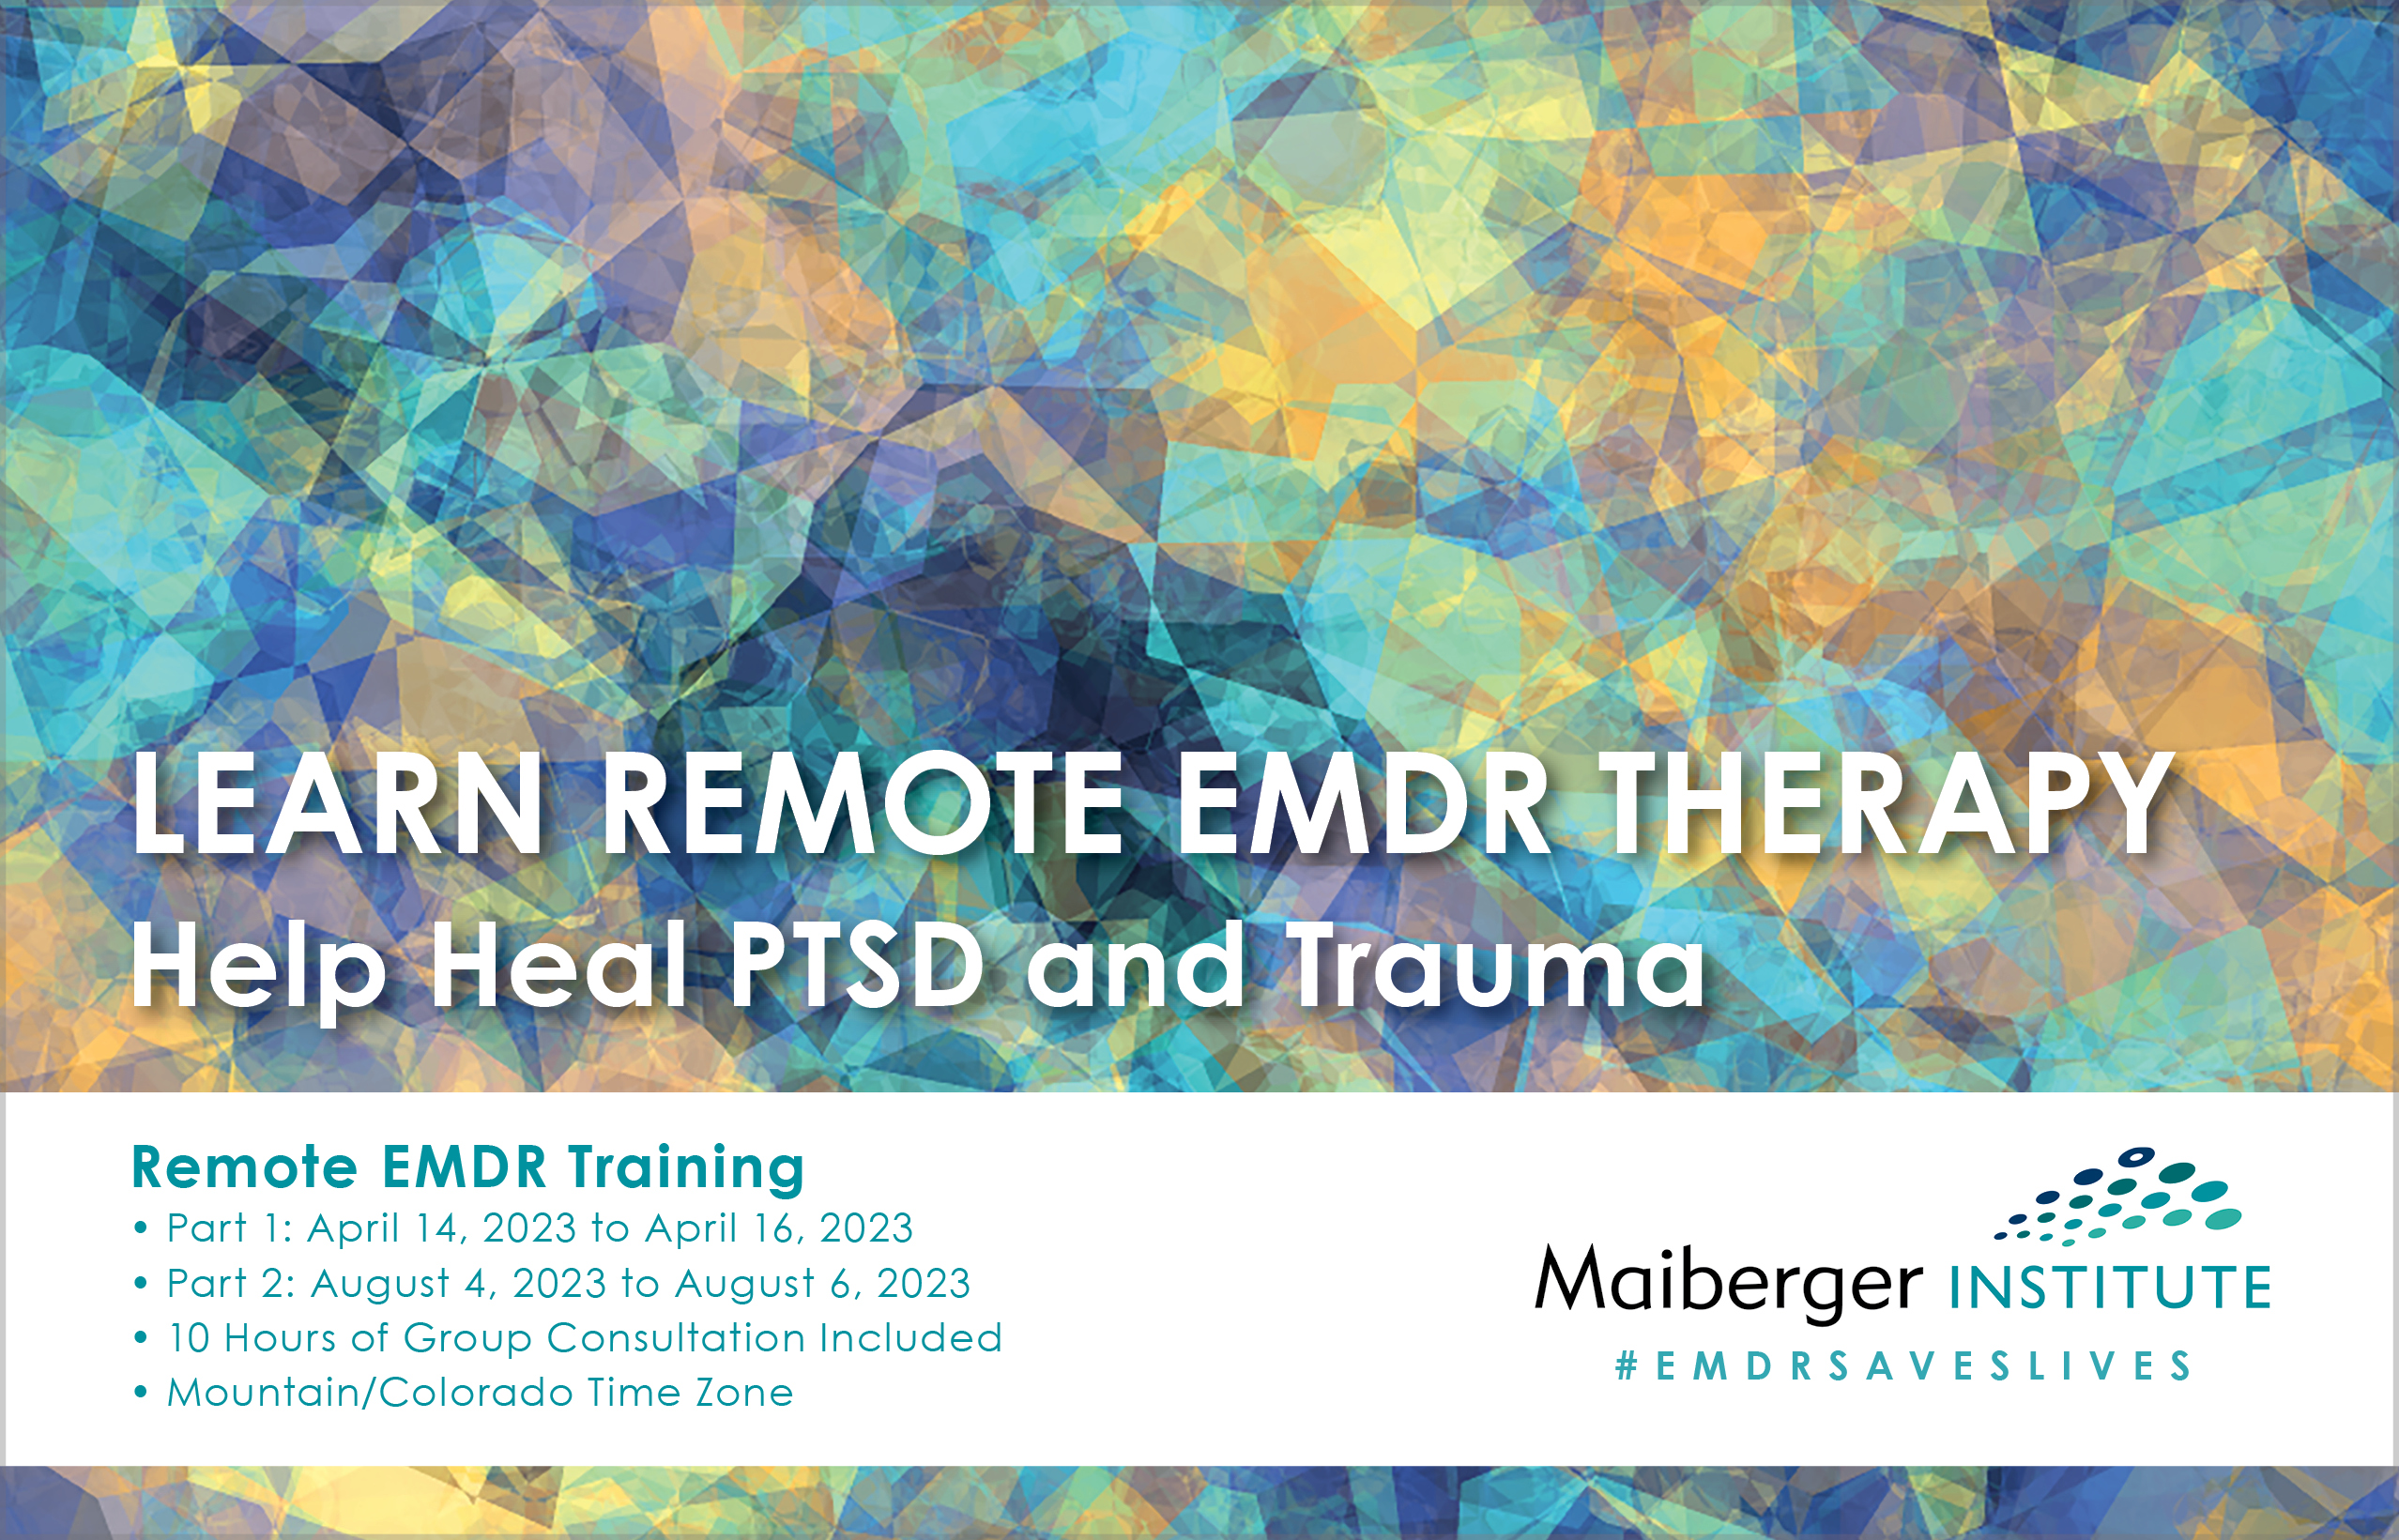 Complete Remote EMDR Training Course - Part 1: April 14, 2023 to April 16, 2023 - Part 2: August 4, 2023 to August 6, 2023 - 10 Hours of Group Consultation Included - Mountain Time Zone (Colorado Time) - APA and NBCC CE Credit Hours Available - #EMDRSAVESLIVES